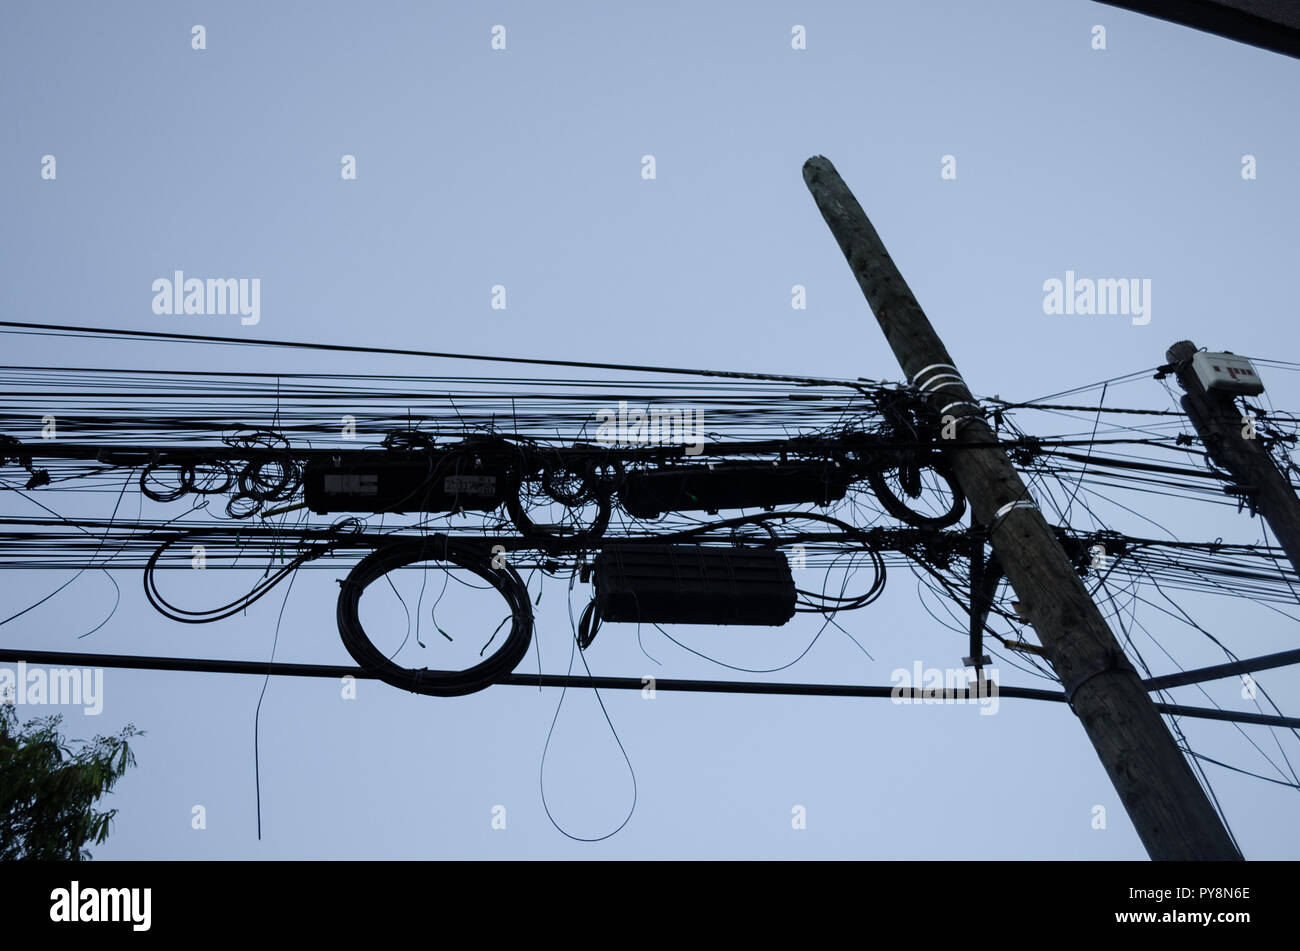 Light pole with many tangled cables, concept of disorder and problems in life, pattern of black cables on a wooden pole. Stock Photo